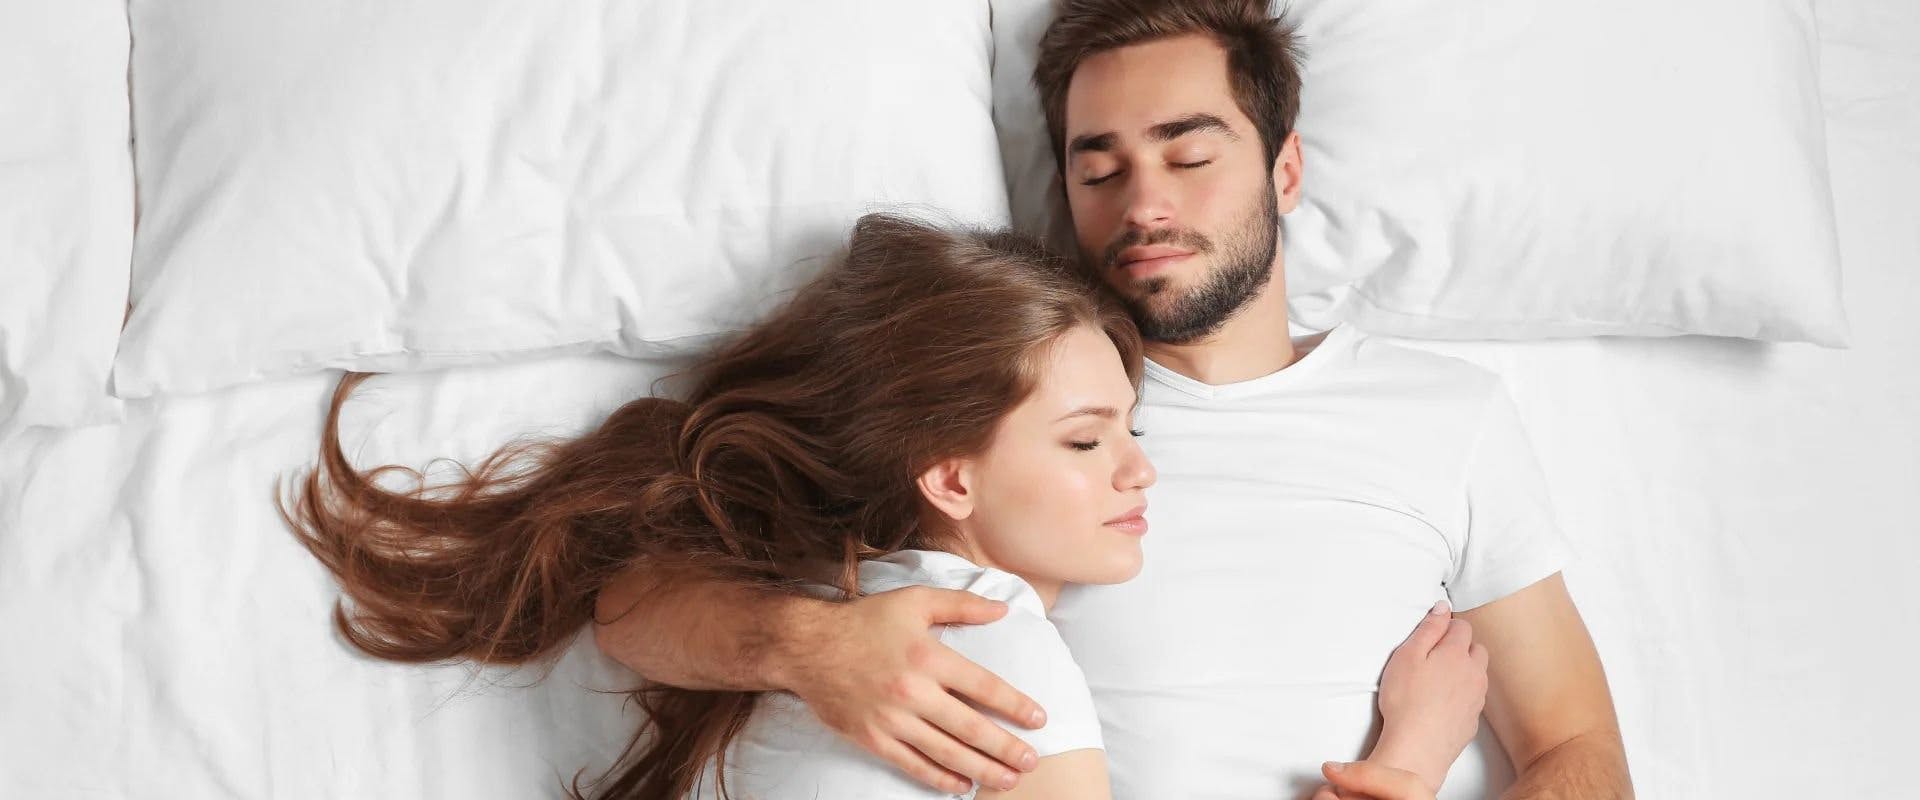 12 Types of Couple Sleeping Positions and What They Mean